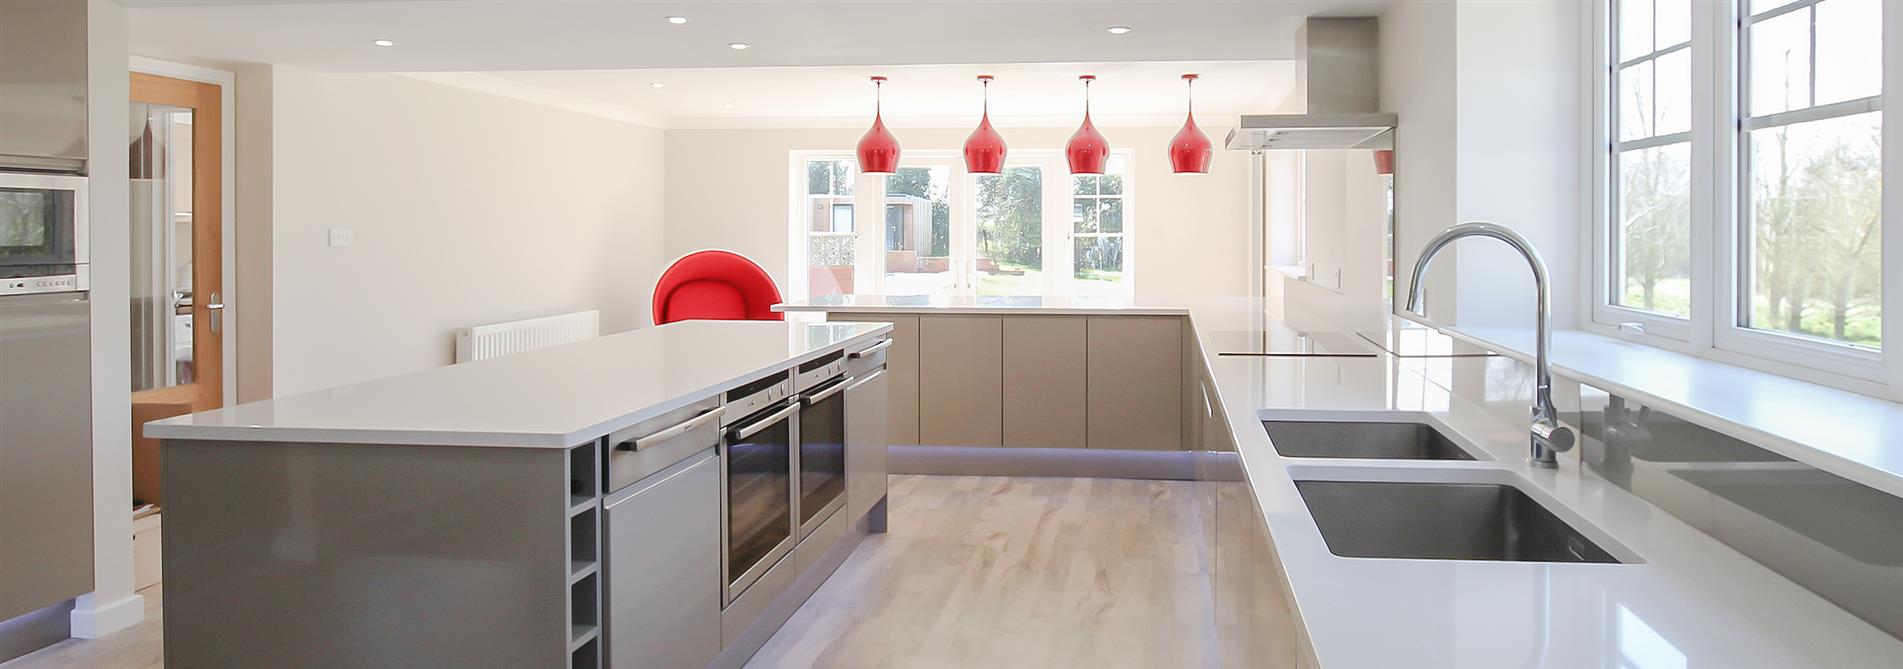 Kitchen with red accents